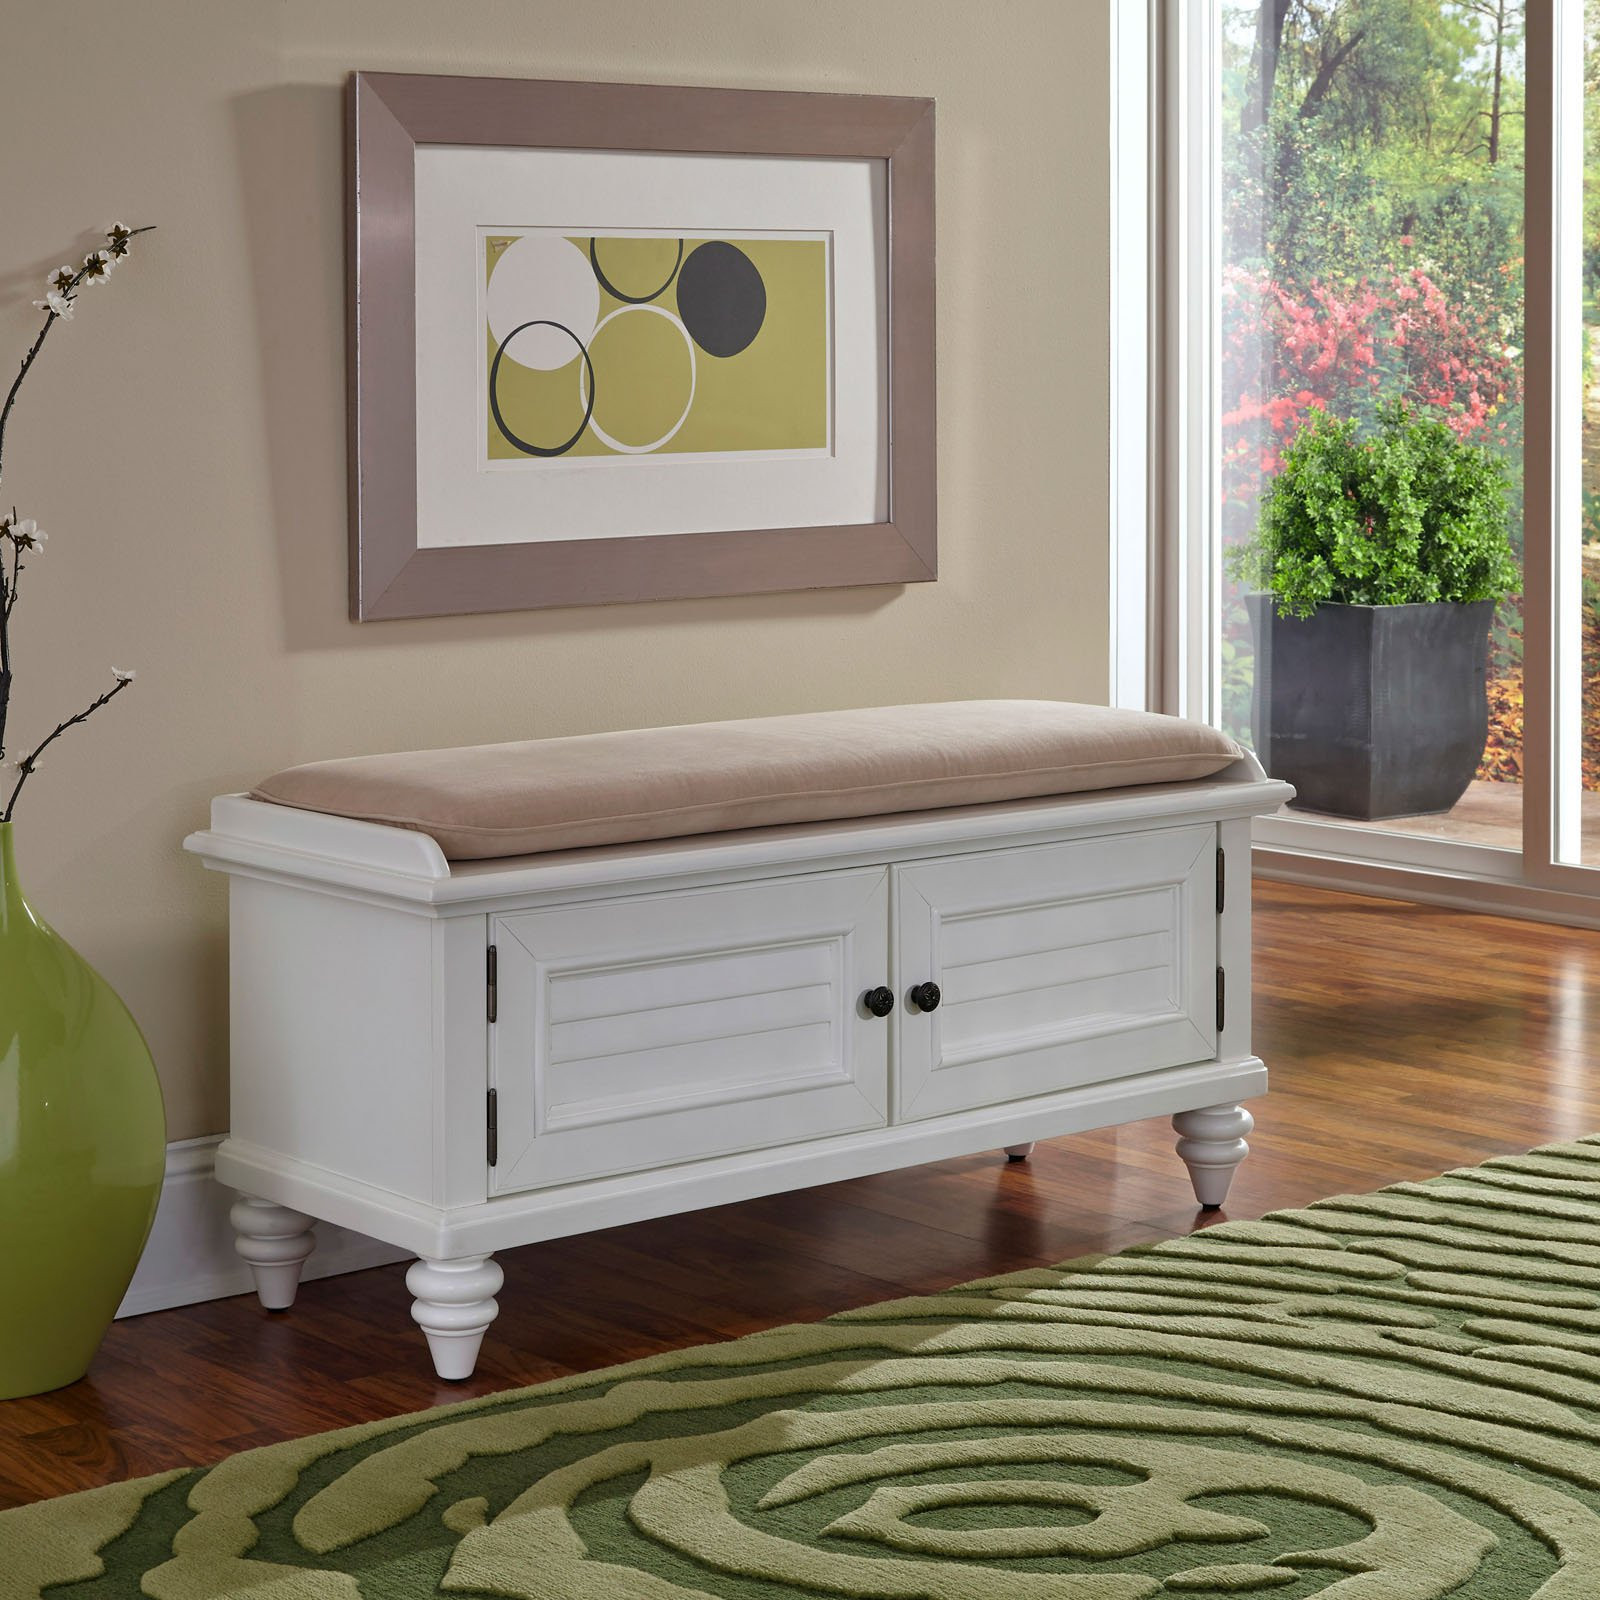 Padded Bench Seat With Storage
 Home Styles Bermuda Upholstered Storage Bench Brushed